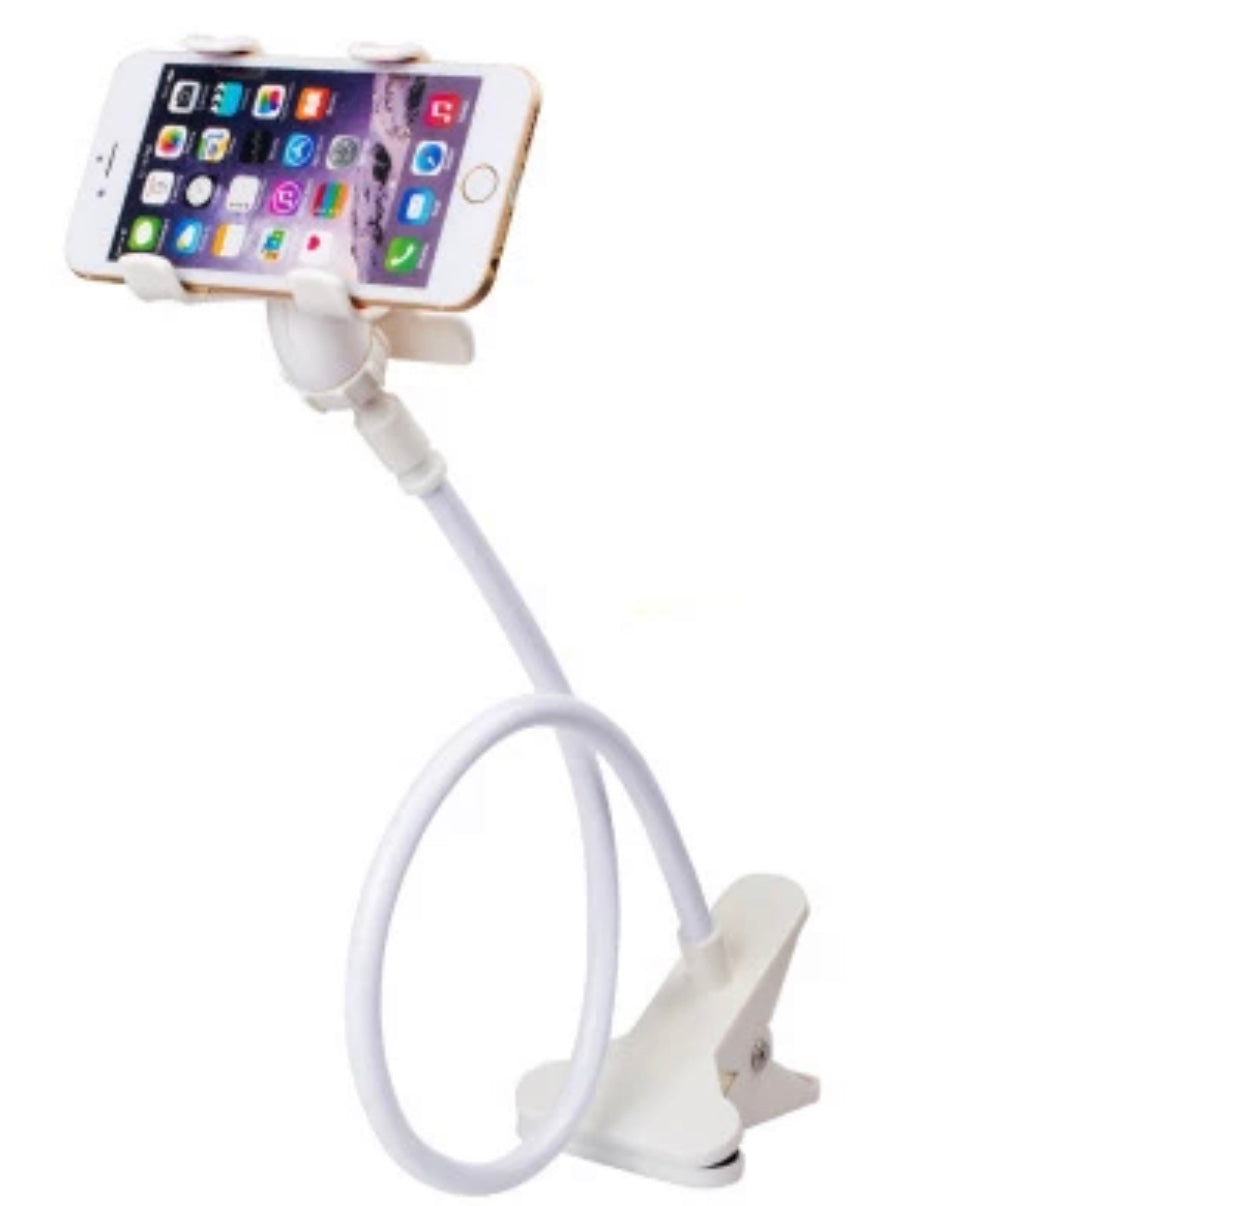 Phone Holder Adjustable Gooseneck 360 Degrees Rotation Flexible to adjust the position at an ideal distance and comfortable angle for easy viewing. Ivory.